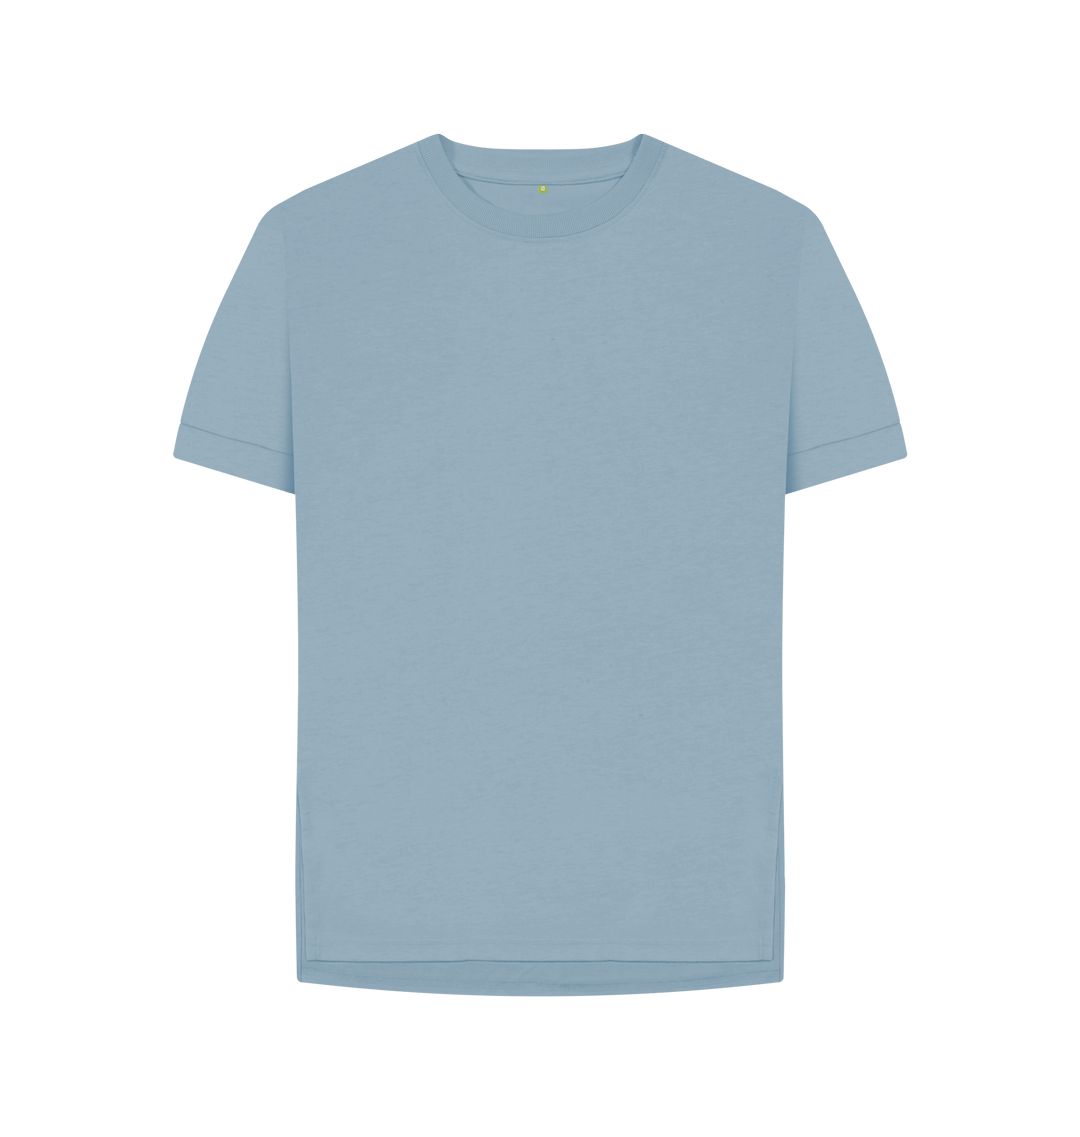 Stone Blue Women's organic cotton relaxed fit t-shirt